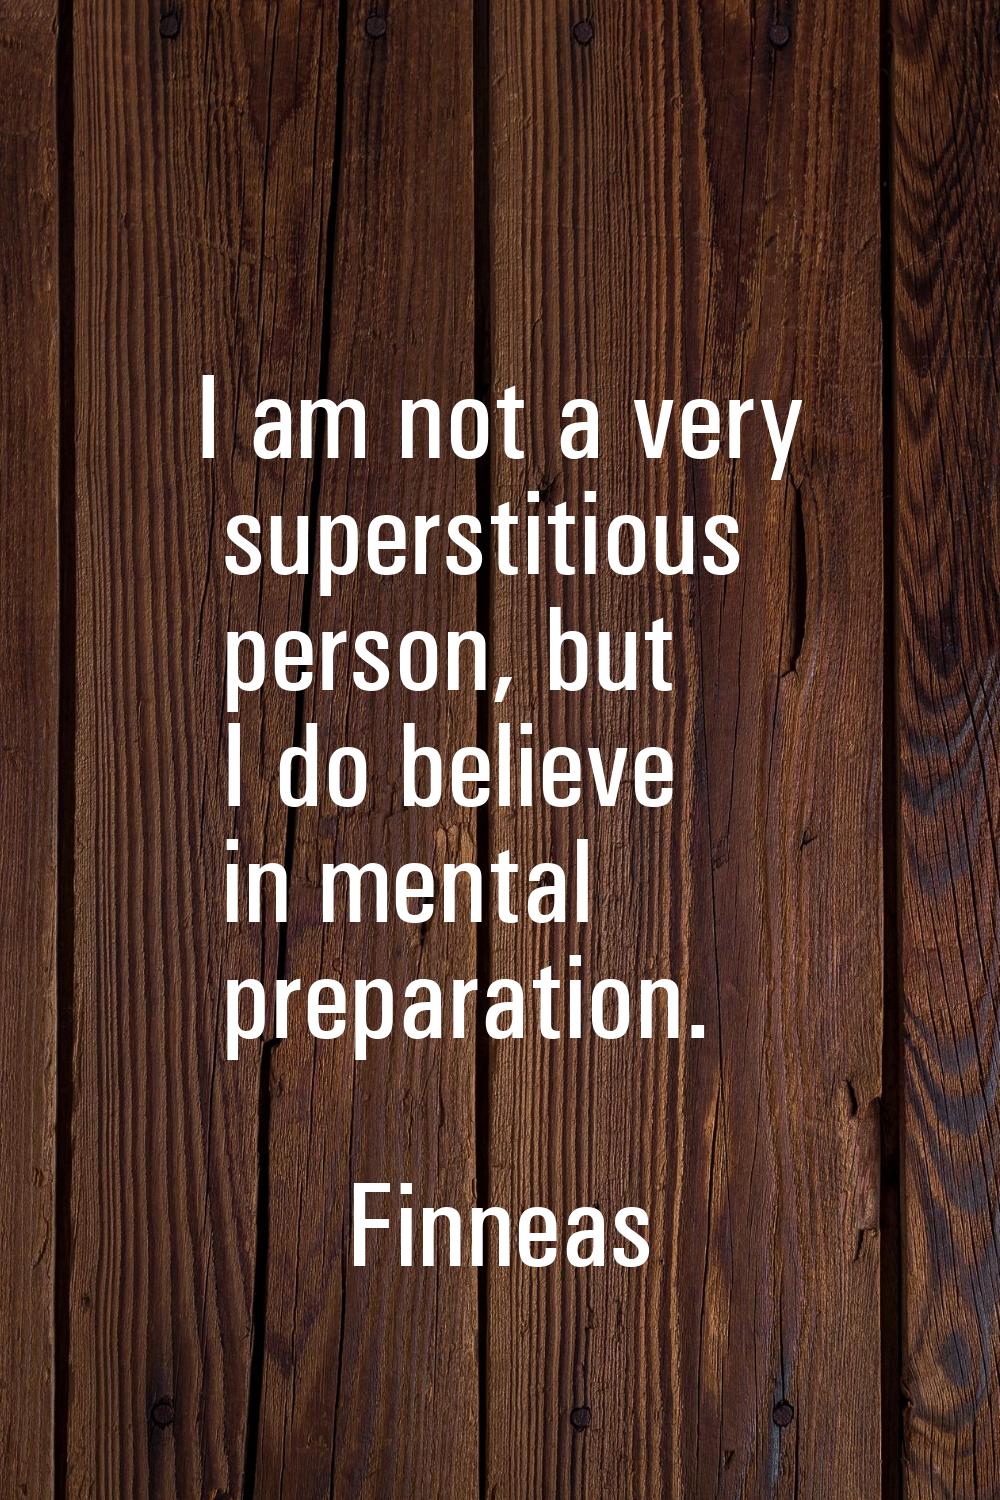 I am not a very superstitious person, but I do believe in mental preparation.